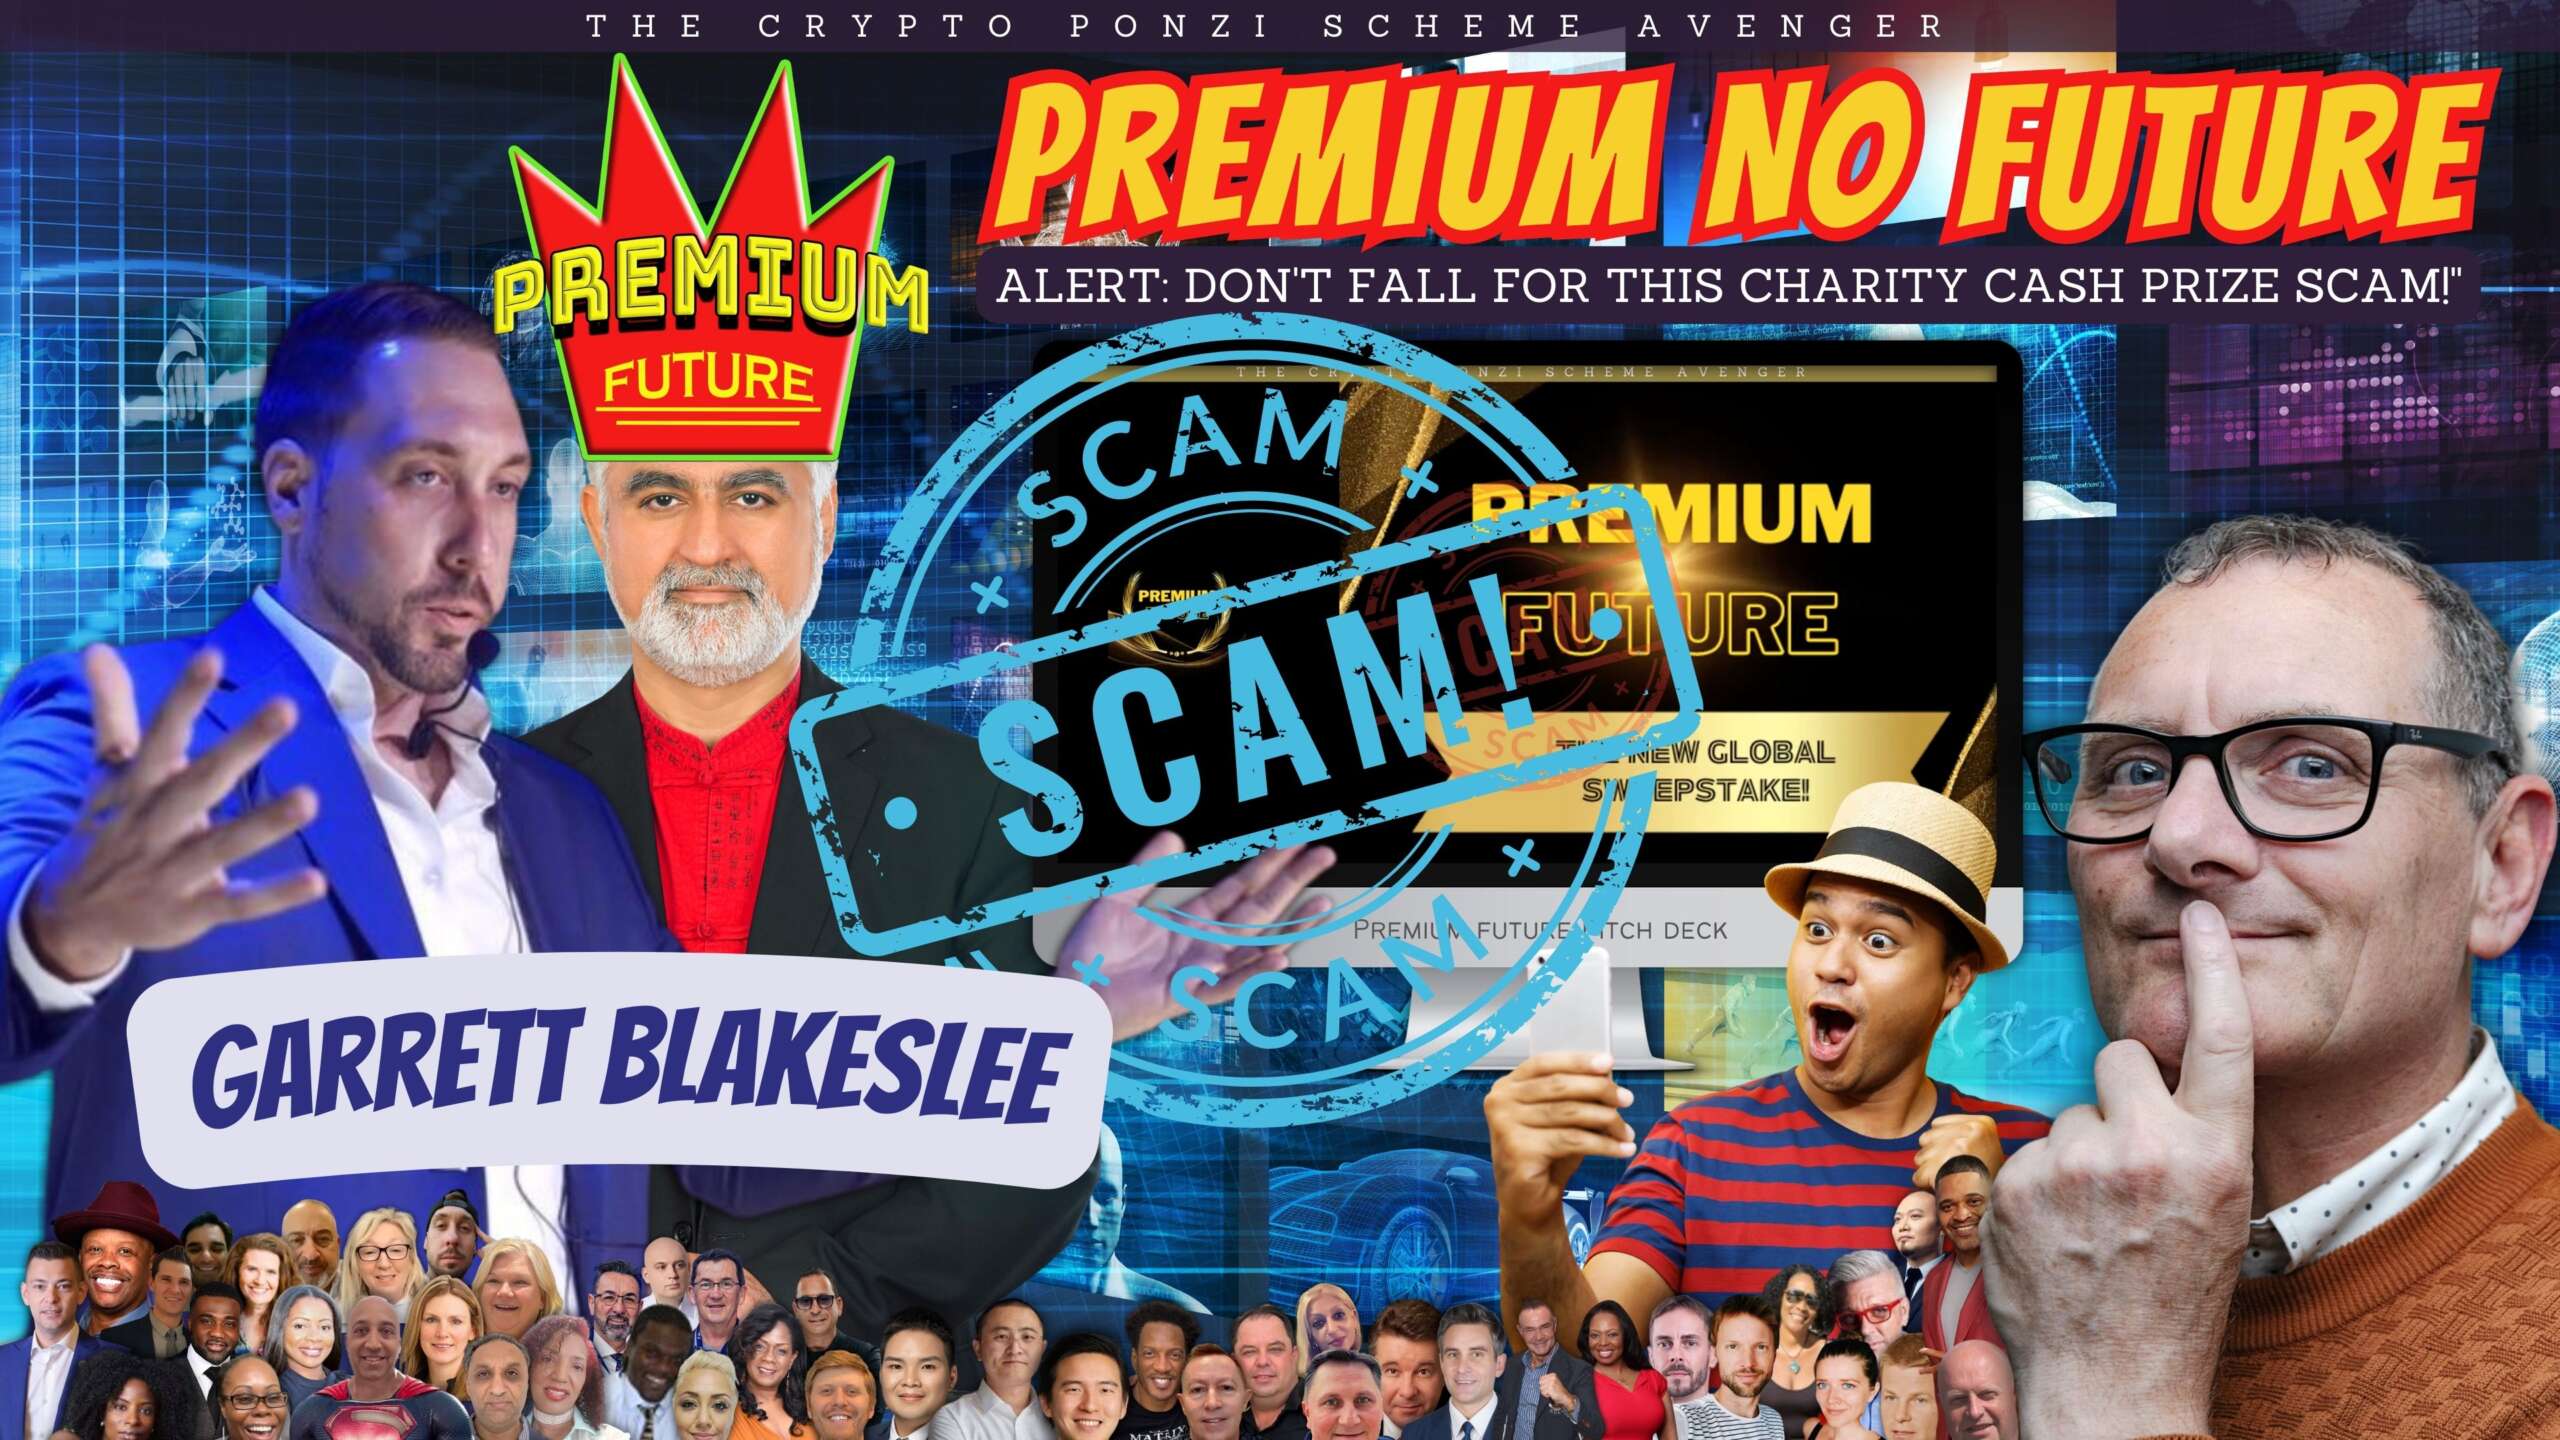 PREMIUM NO FUTURE Scam or Legit Dont fall for this CHARITY SWEEPSTAKE offering CRYPTO CASH PRIZES Entrepreneur Decision Maker Connector Podcaster Educator